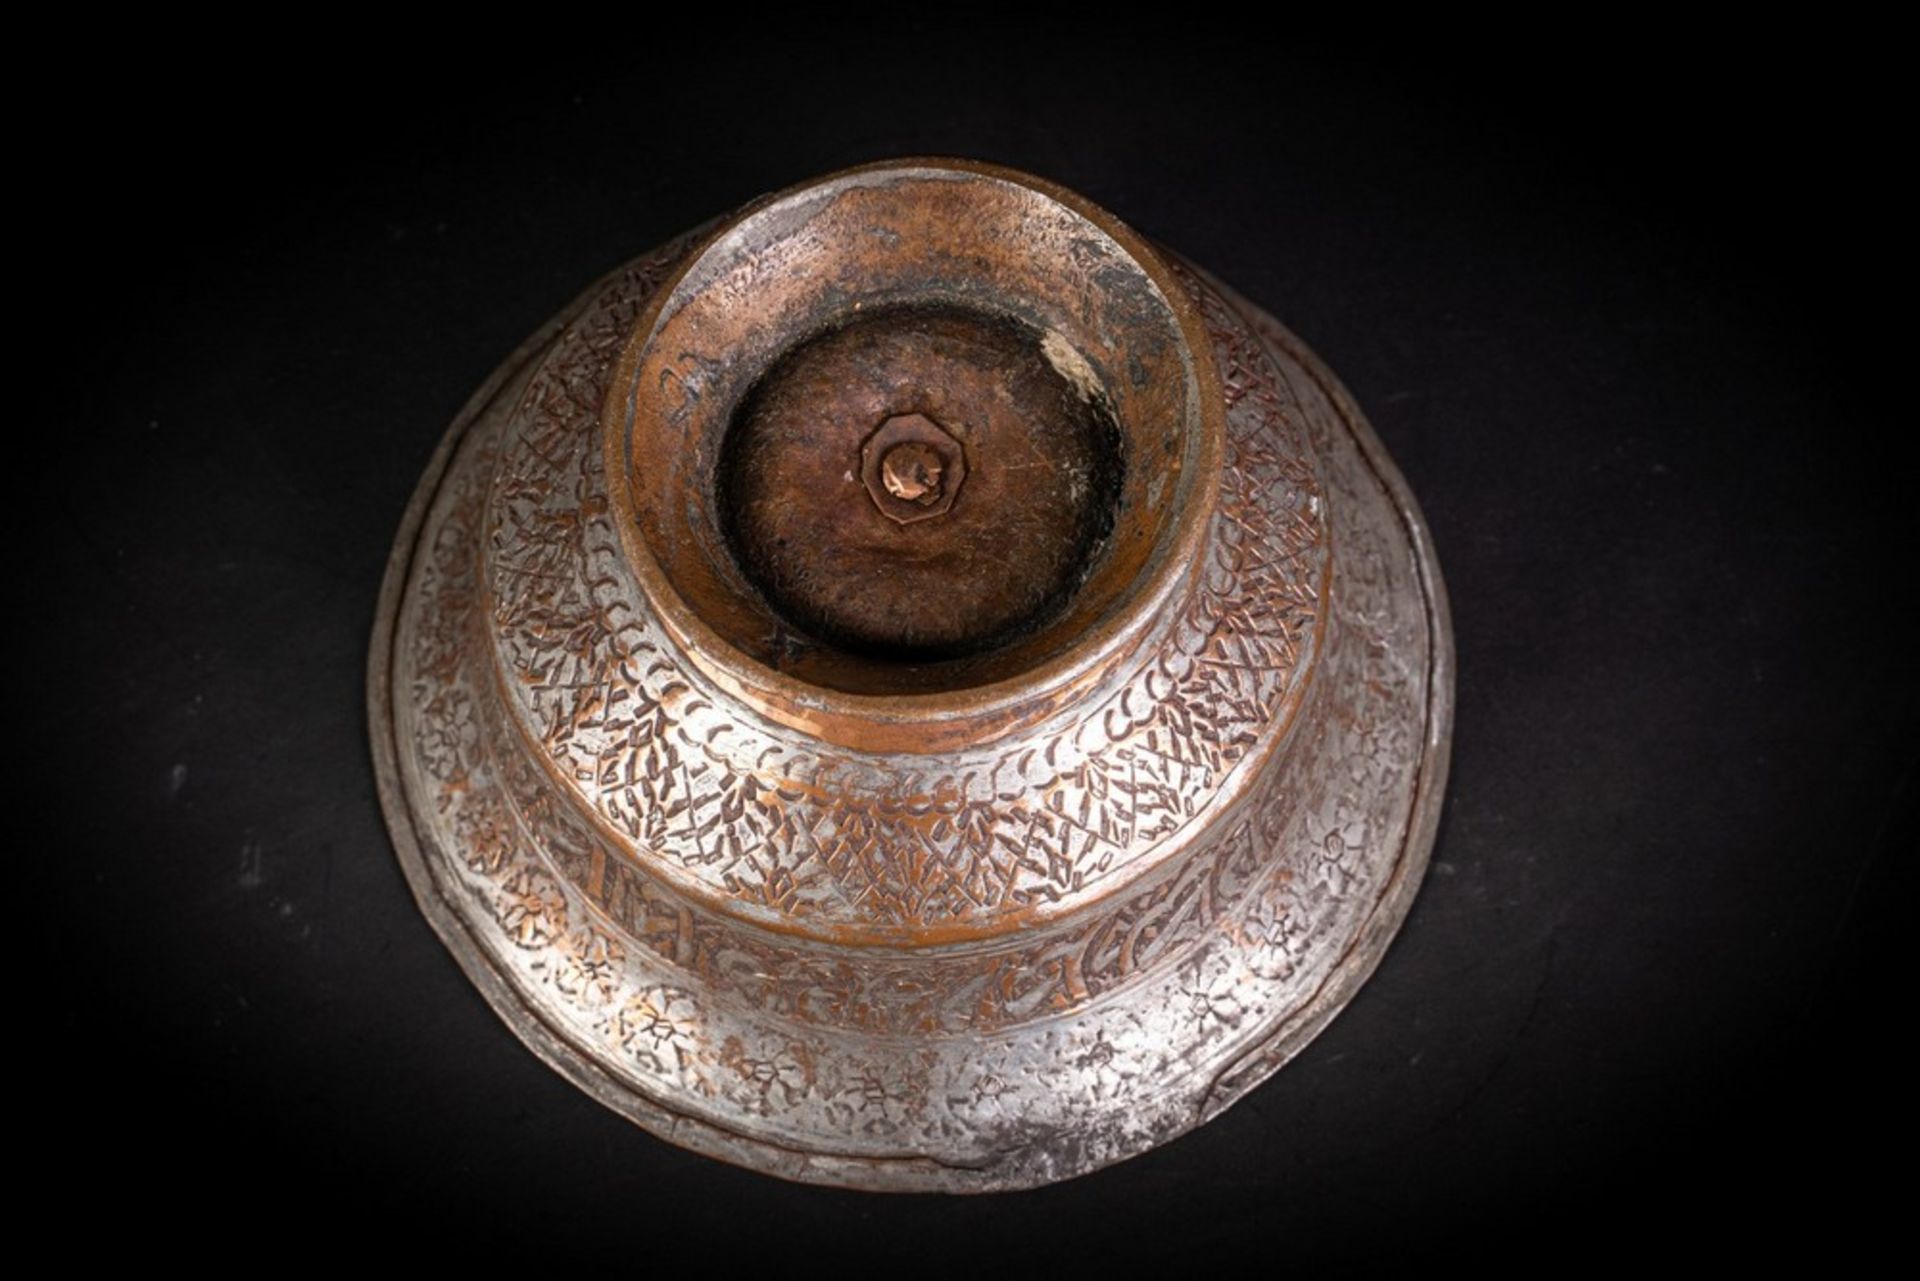 Arte Islamica An embossed tinned copper bowl with inscriptions Folk Safavid Persia, 17th-18th centu - Image 3 of 3